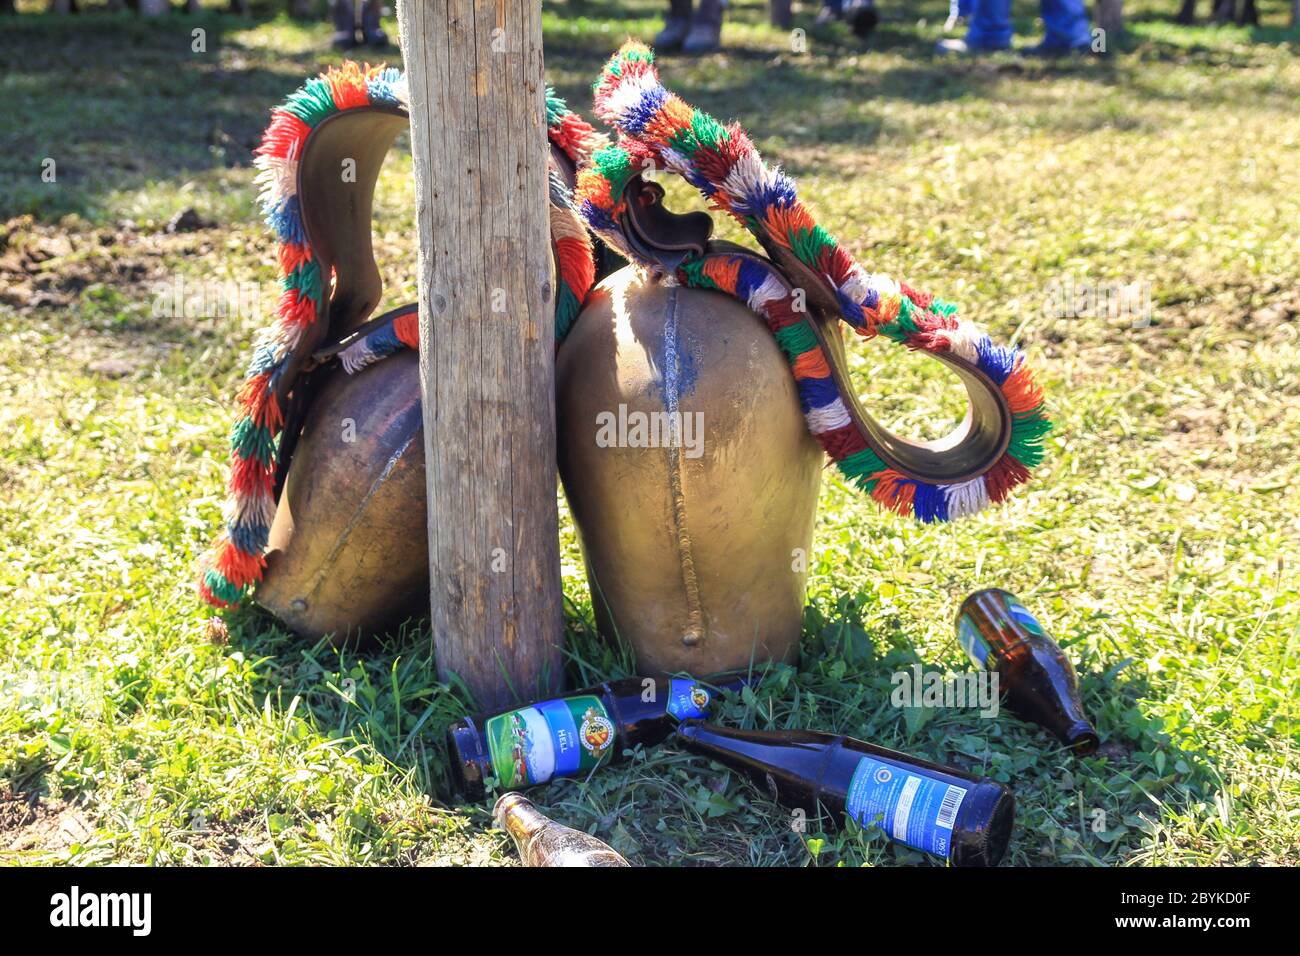 BAD HINDELANG, BAVARIA, GERMANY - SEPTEMBER 10 2011: Huge colorful cowbell and empty beer bootles on the ground at the traditional annual Almabtrieb Stock Photo